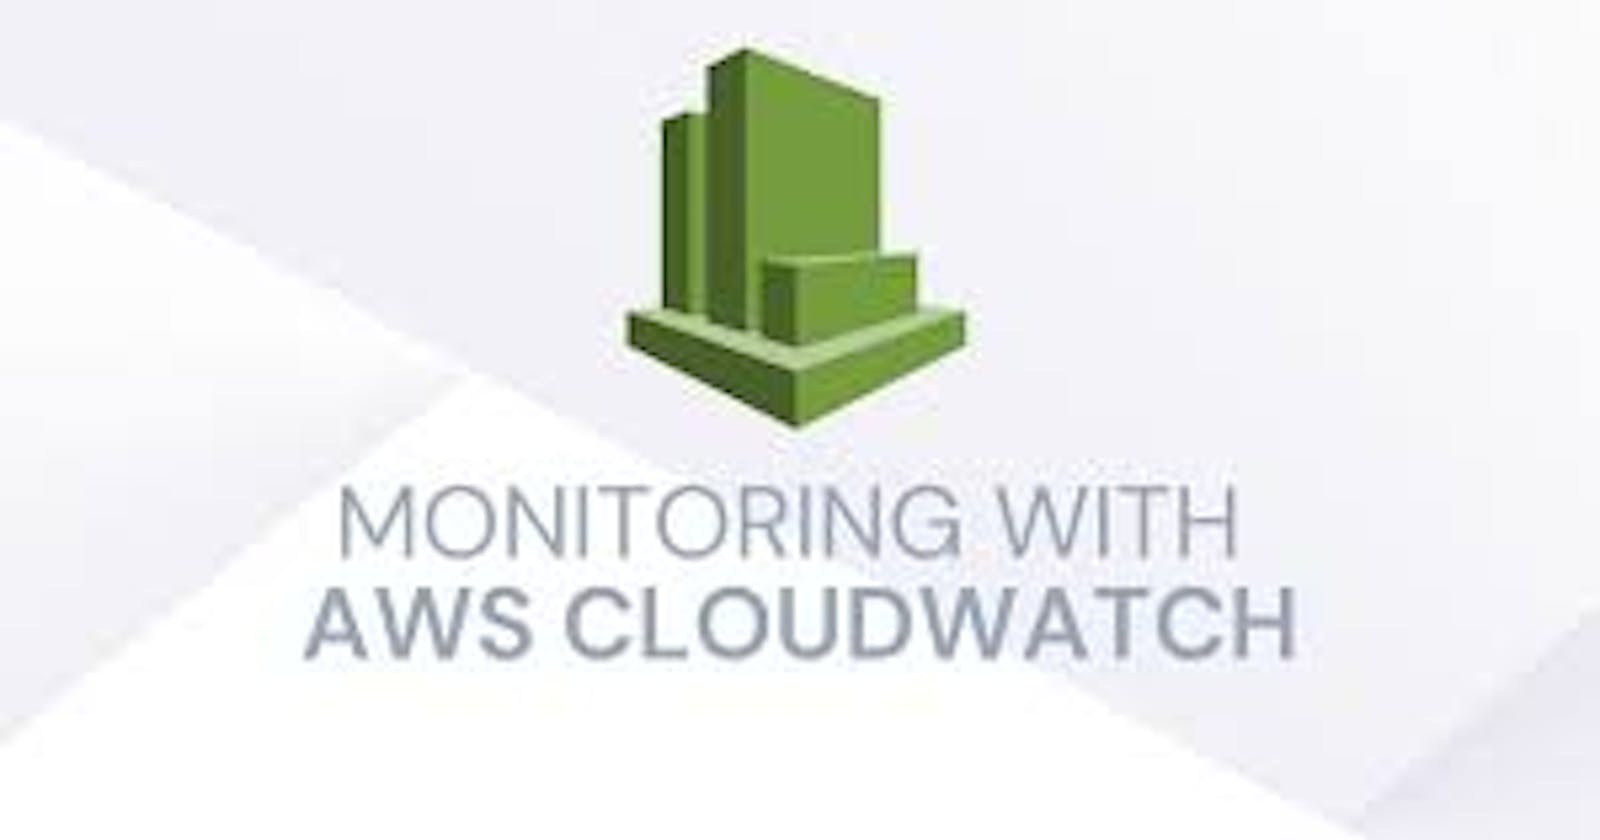 Introduction to AWS CloudWatch